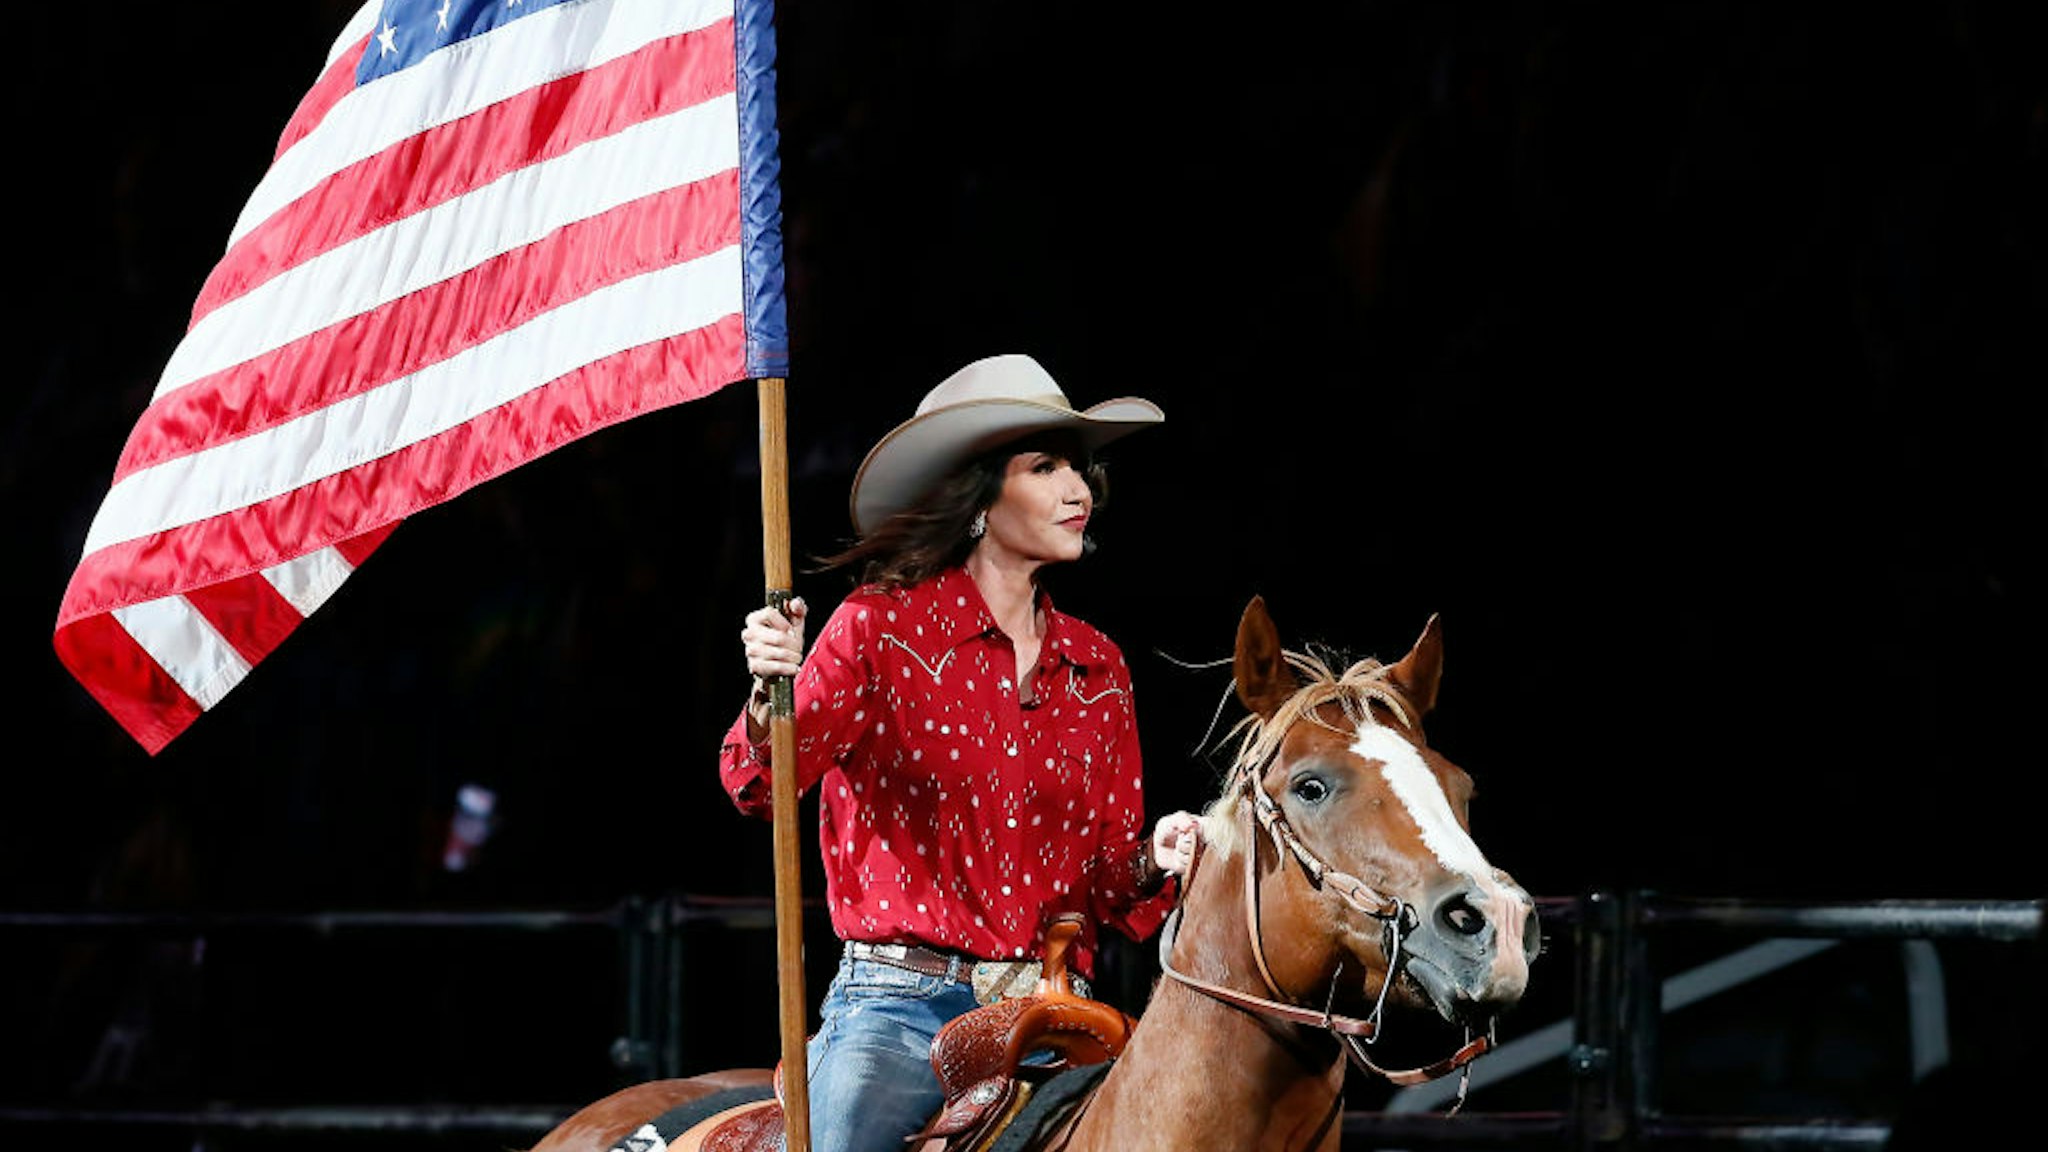 South Dakota's Governor Kristi Noem holds the U.S flag riding a horse during the Monster Energy Team Challenge, on July 11, 2020, at the Denny Sanford PREMIER Center, Sioux Falls, SD.